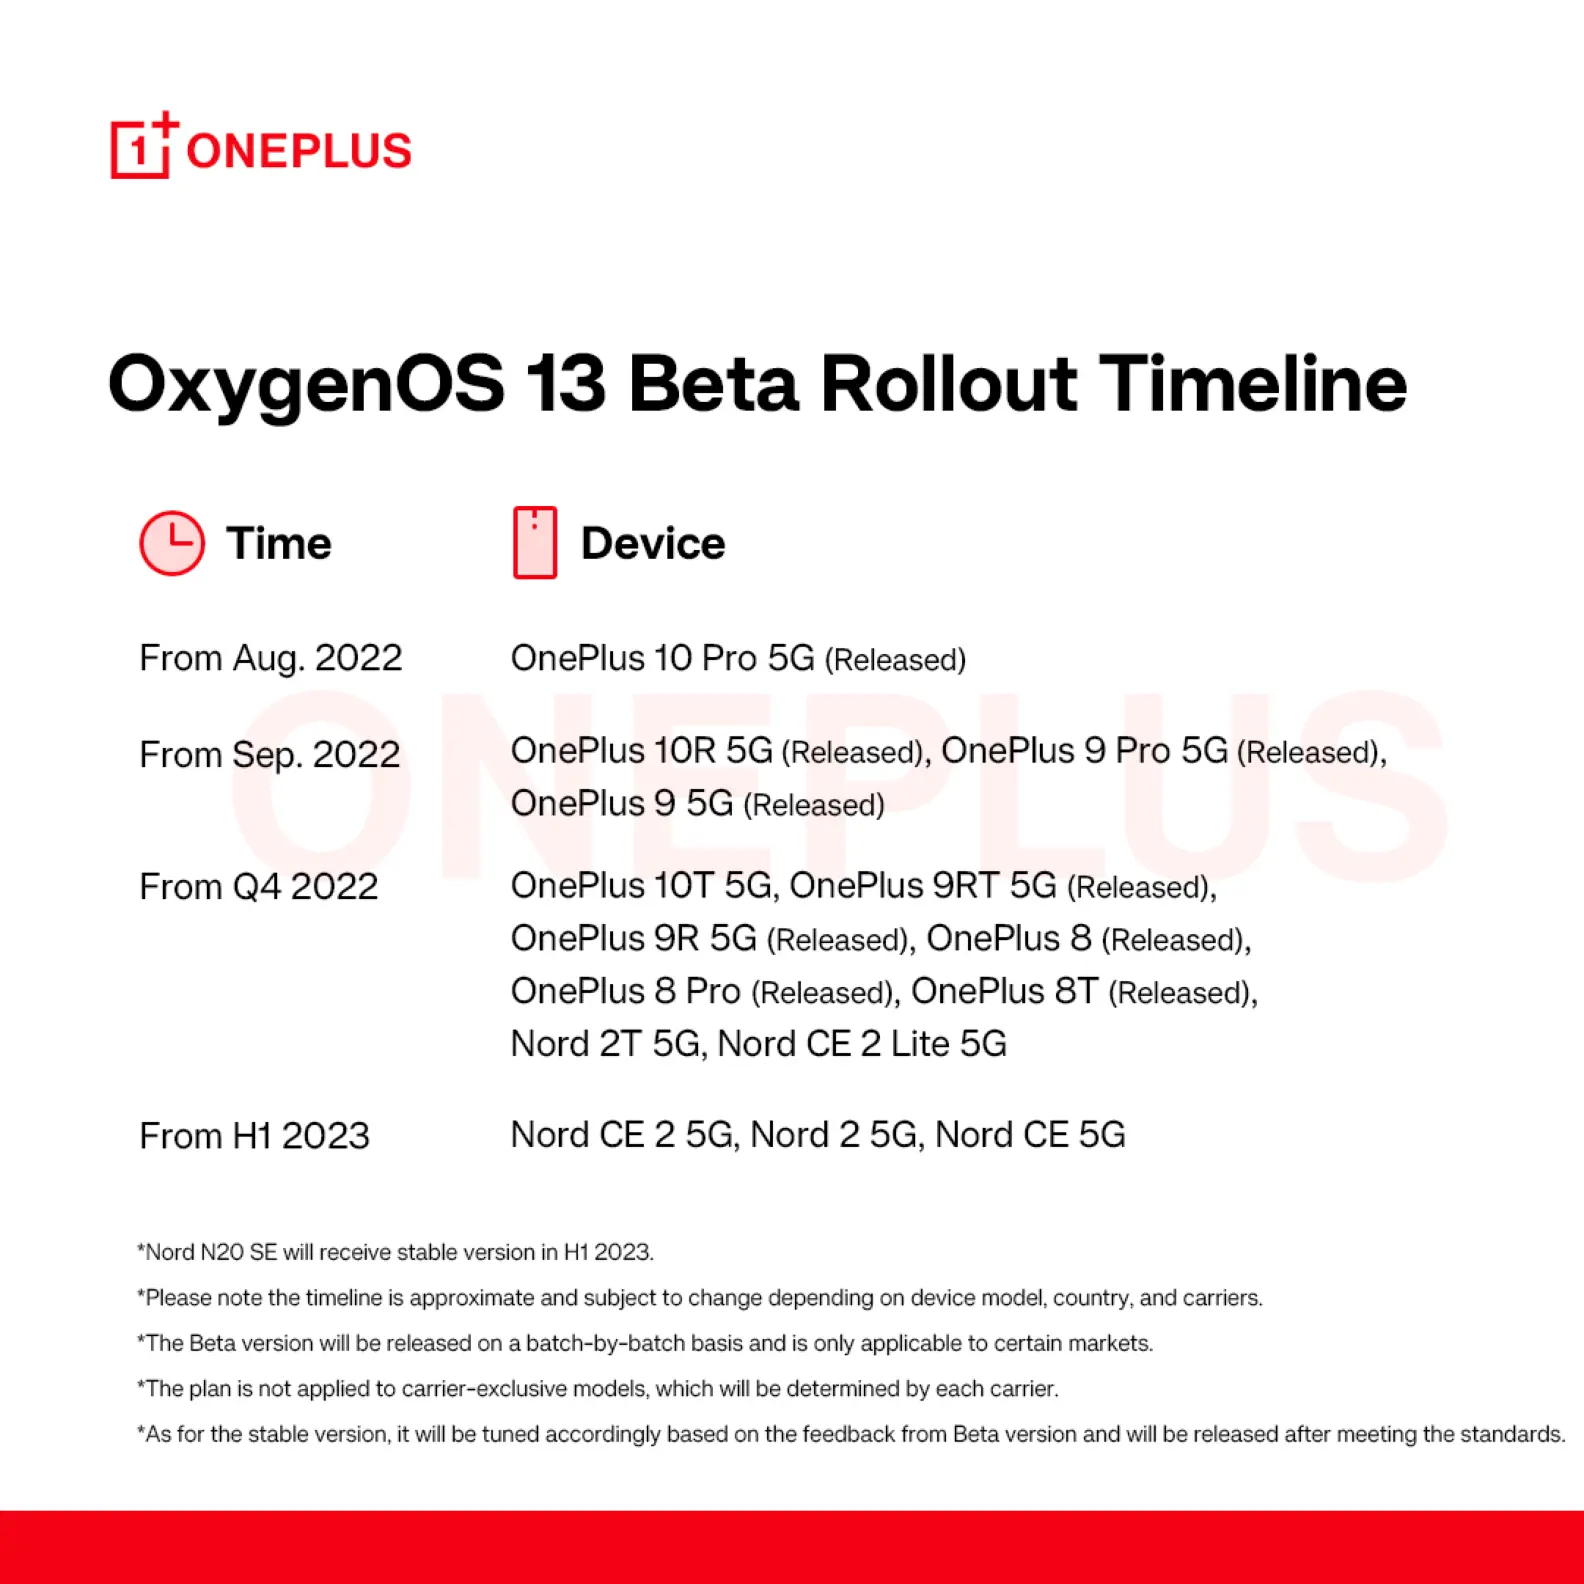 oneplus lista ufificiale android 13 oxygenos 13